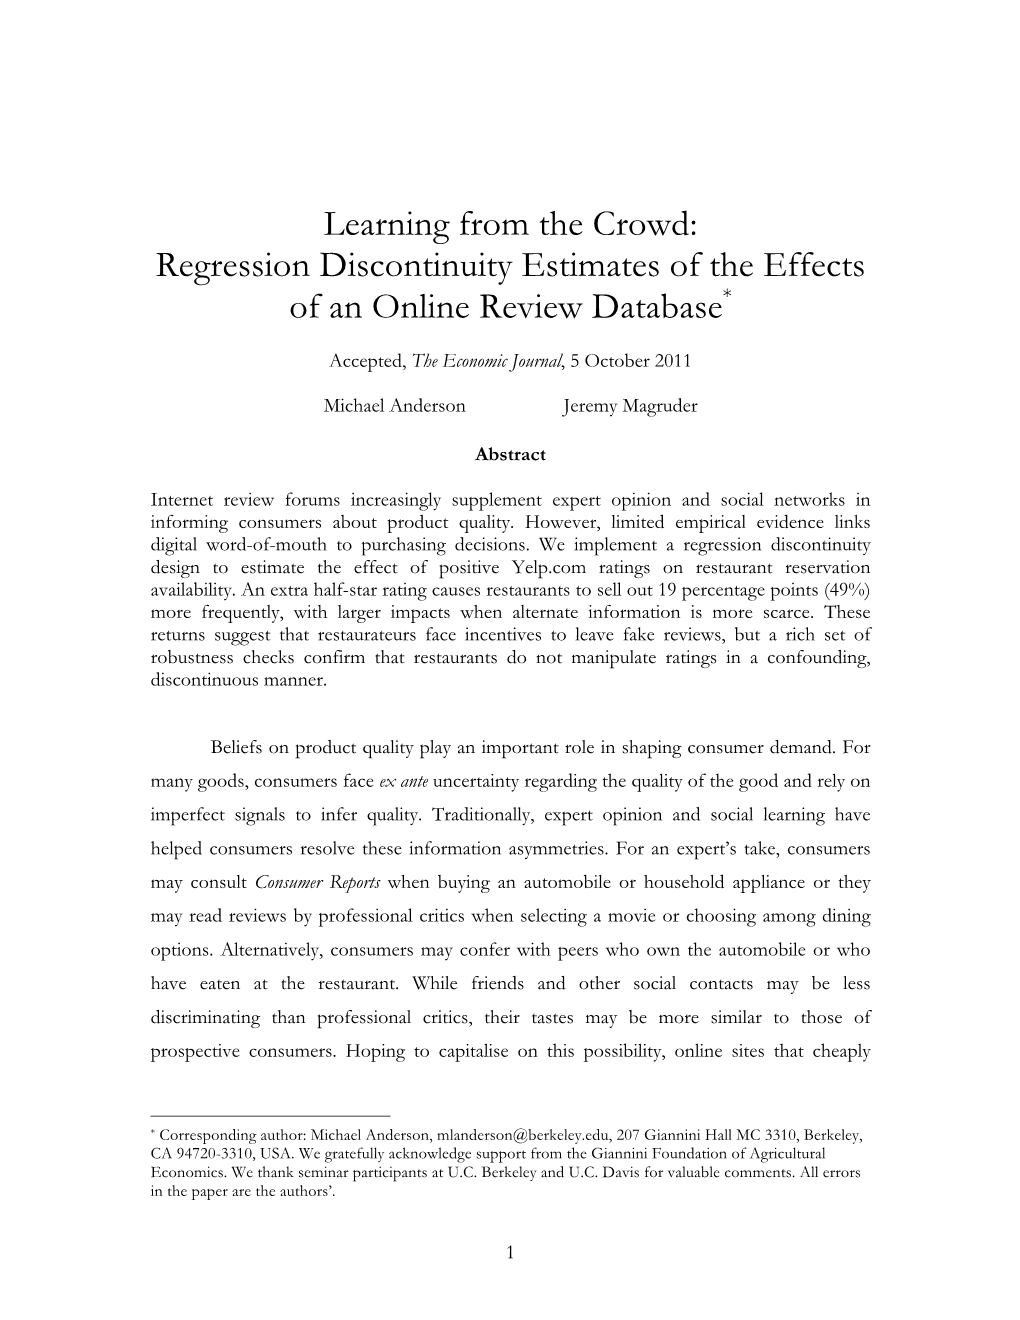 Regression Discontinuity Estimates of the Effects of an Online Review